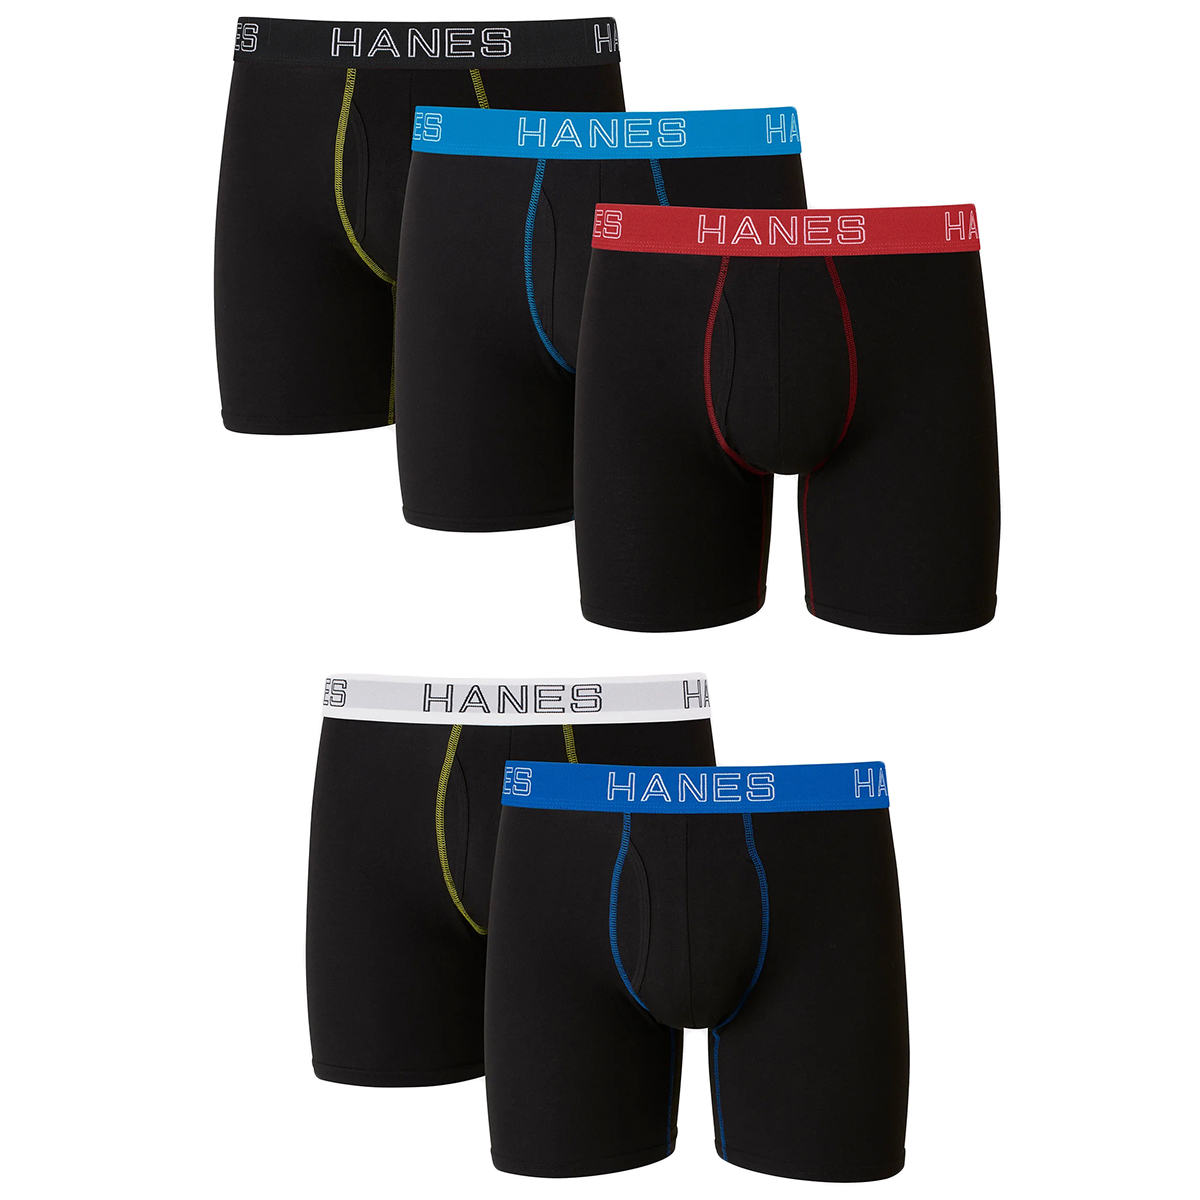 Hanes Men's Ultimate Stretch Boxer Briefs, 5-Pack